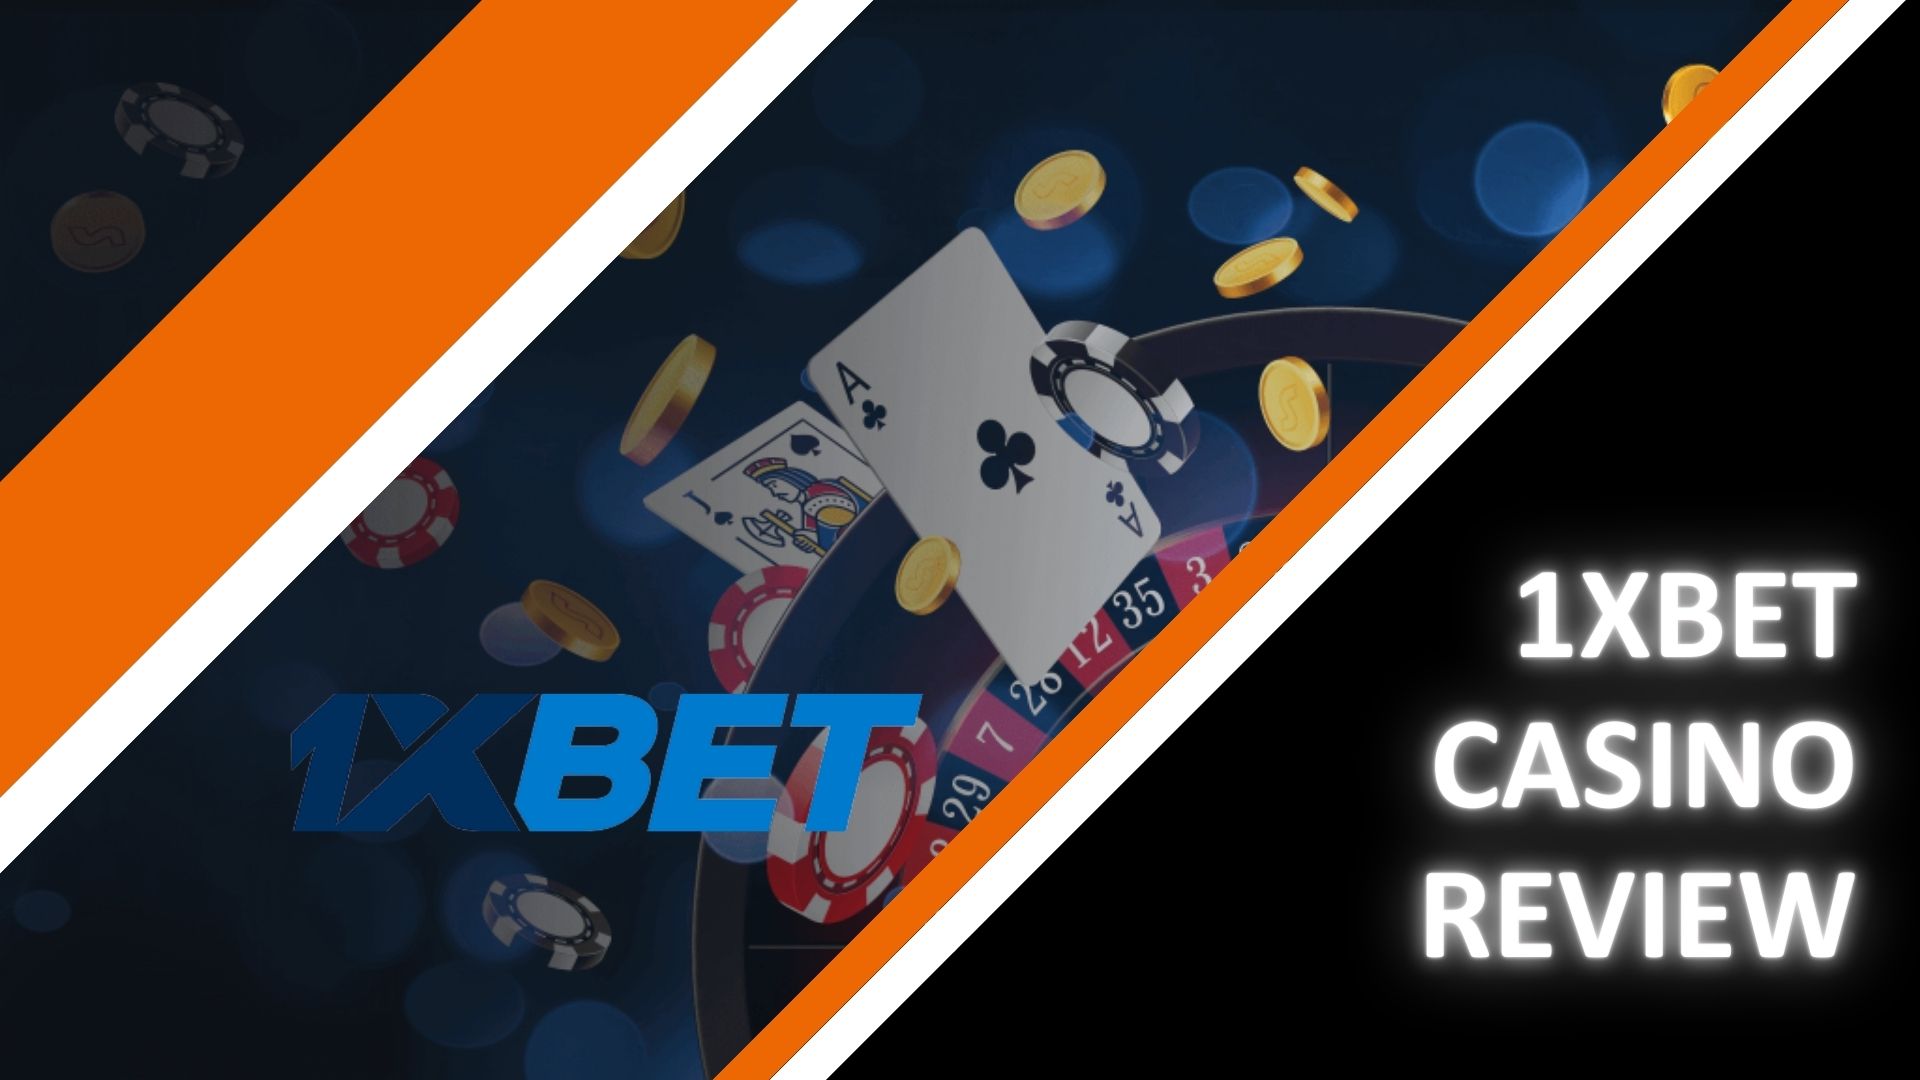 1XBET CASINO REVIEW